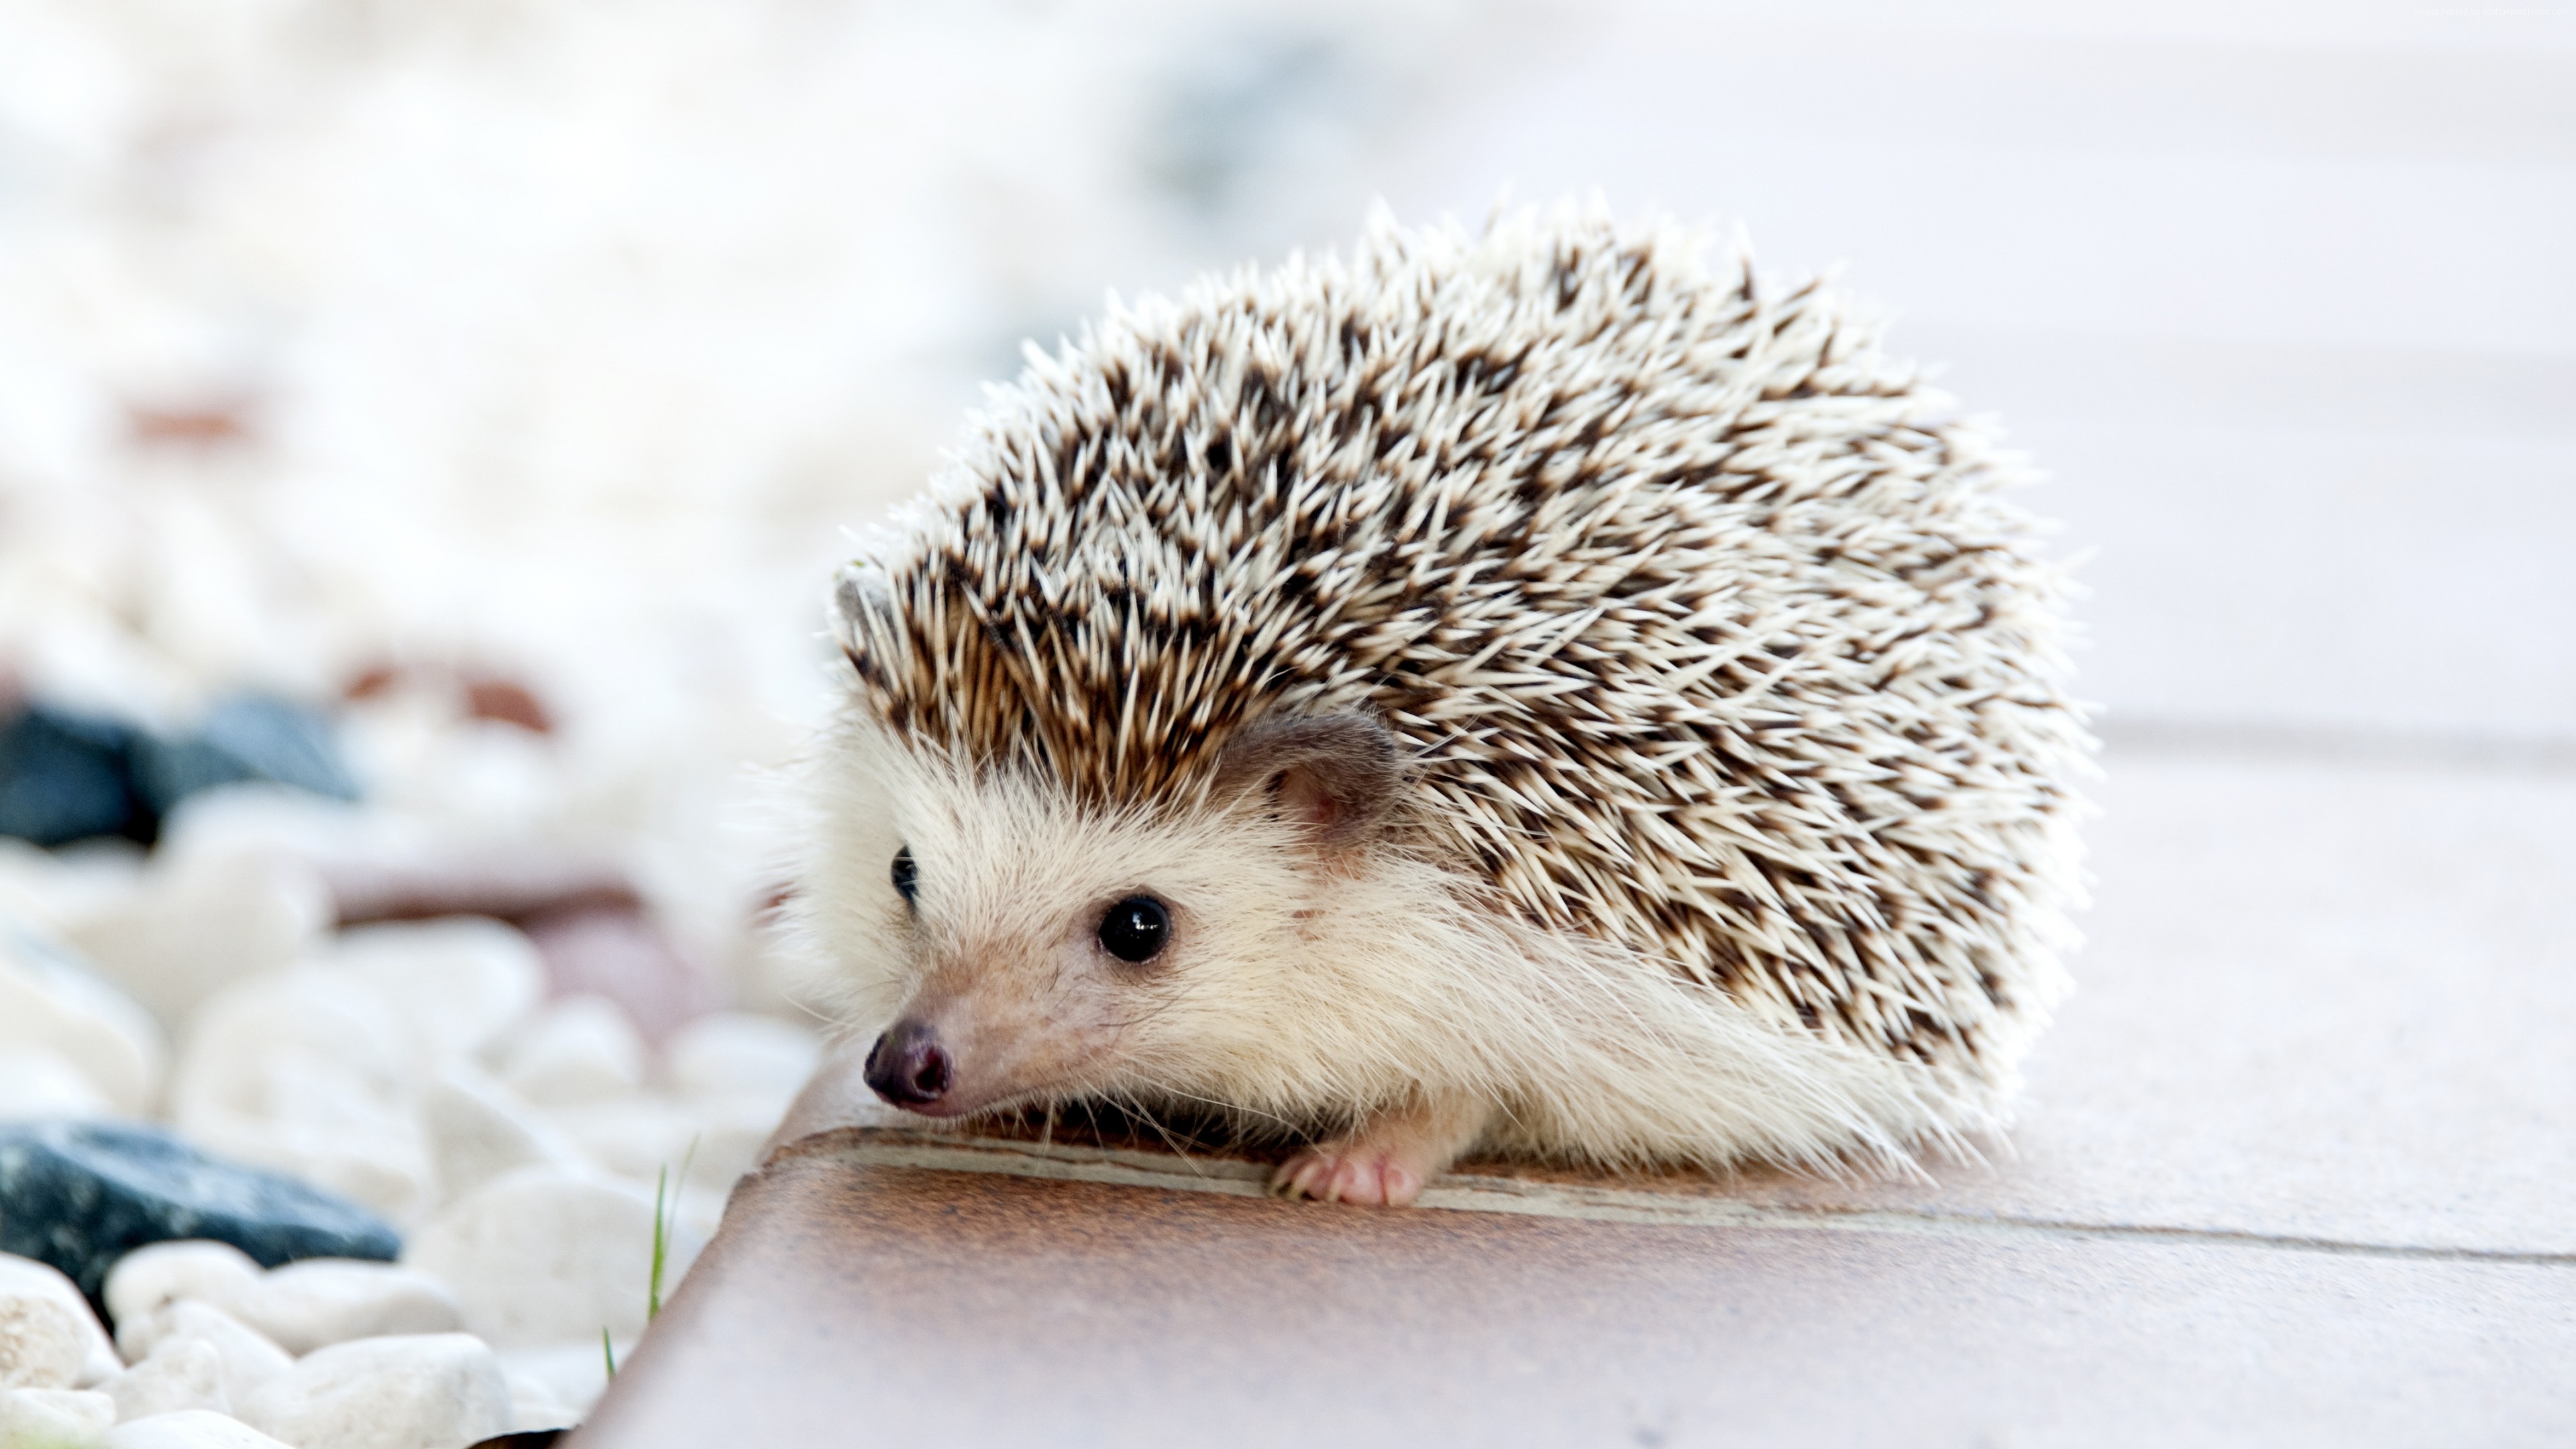 Stock Images hedgehog, cute animals, 4k, Stock Images